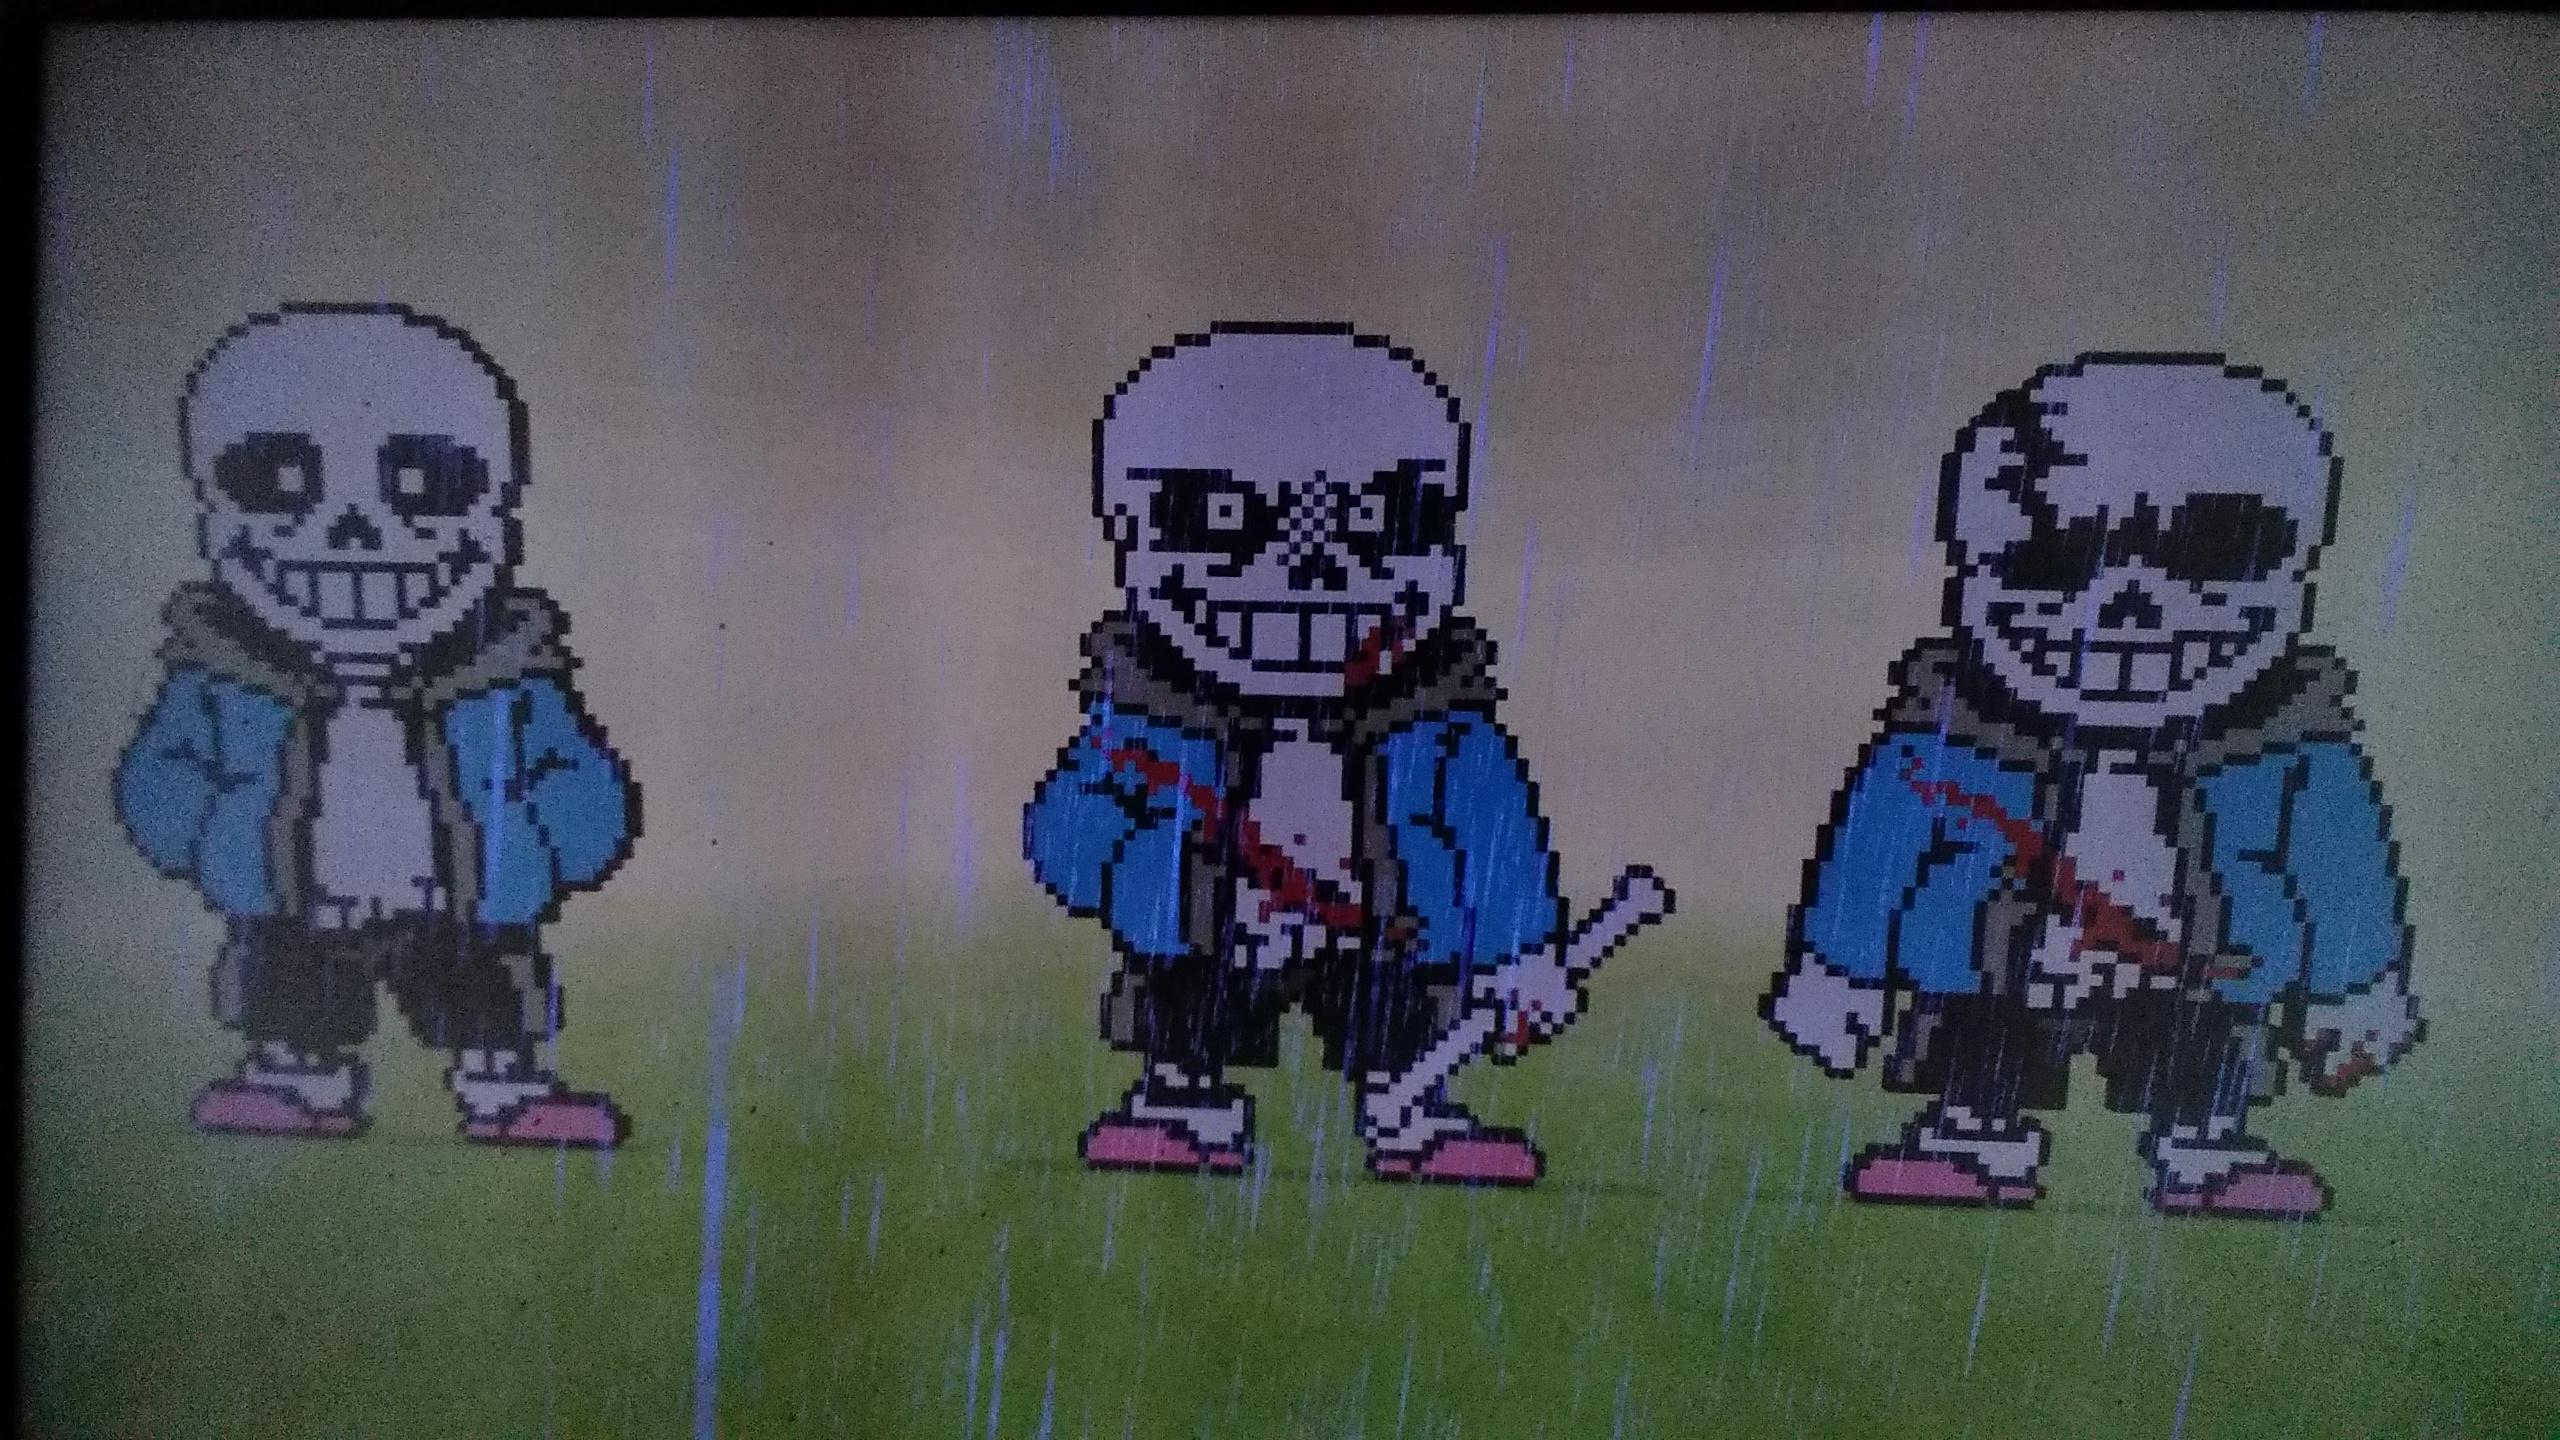 The complete Undertale: last breath phases, this was really fun to make, but it's done